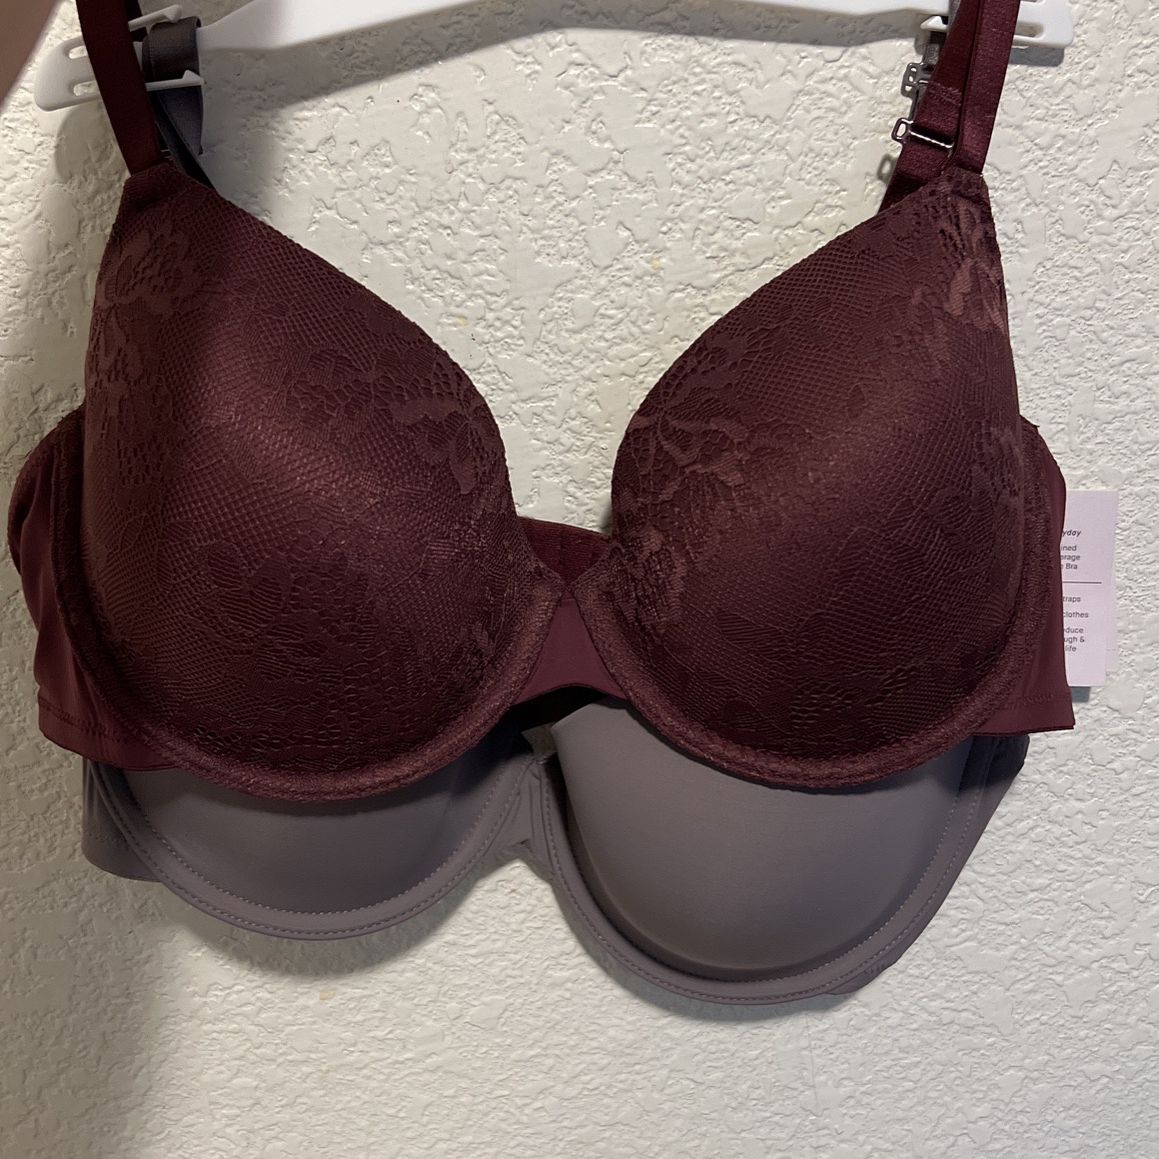 New Bras For Sale